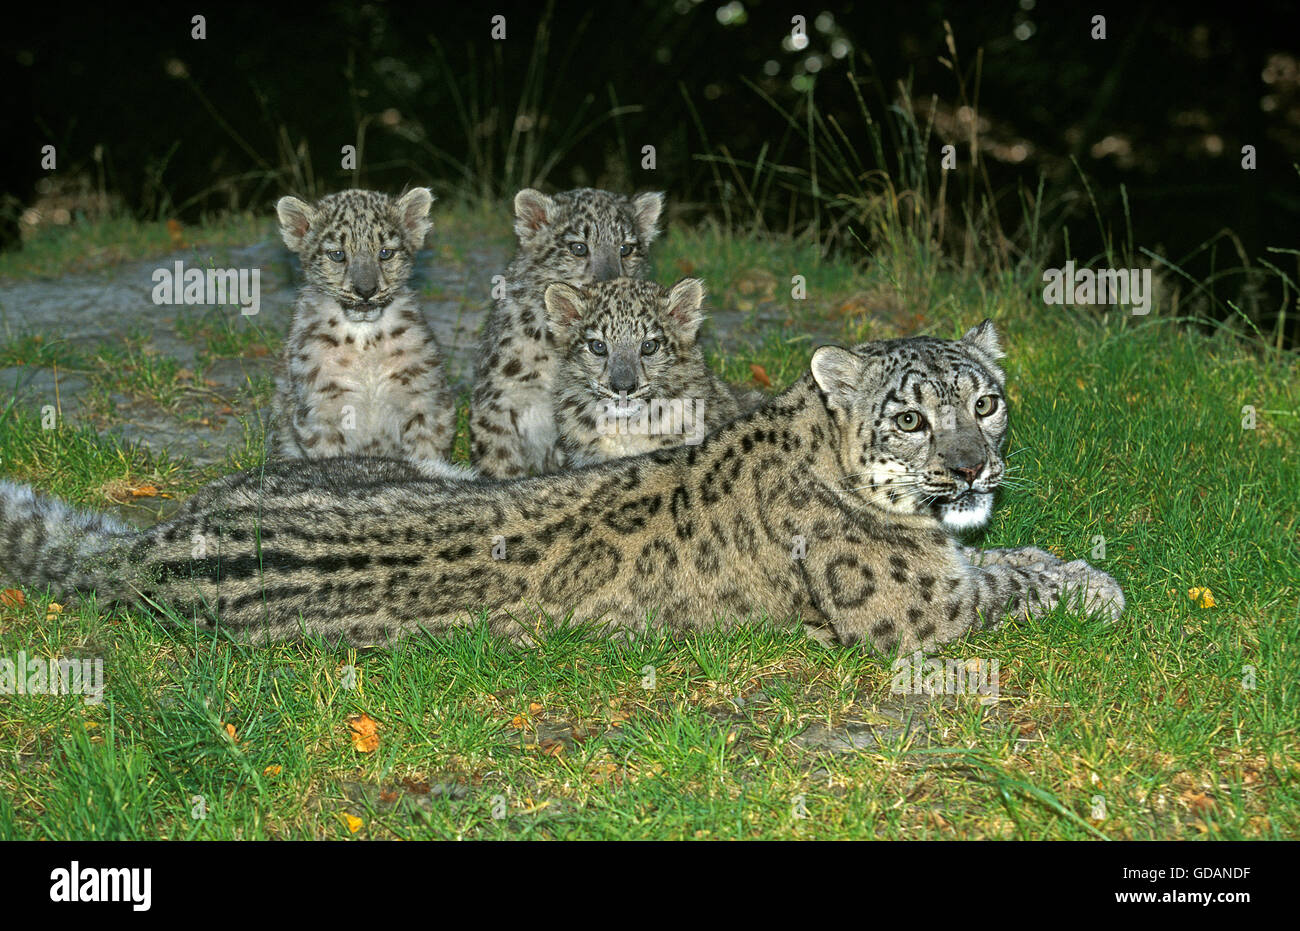 Snow Leopard or Ounce, uncia uncia, Female with Cub Laying on Grass Stock Photo